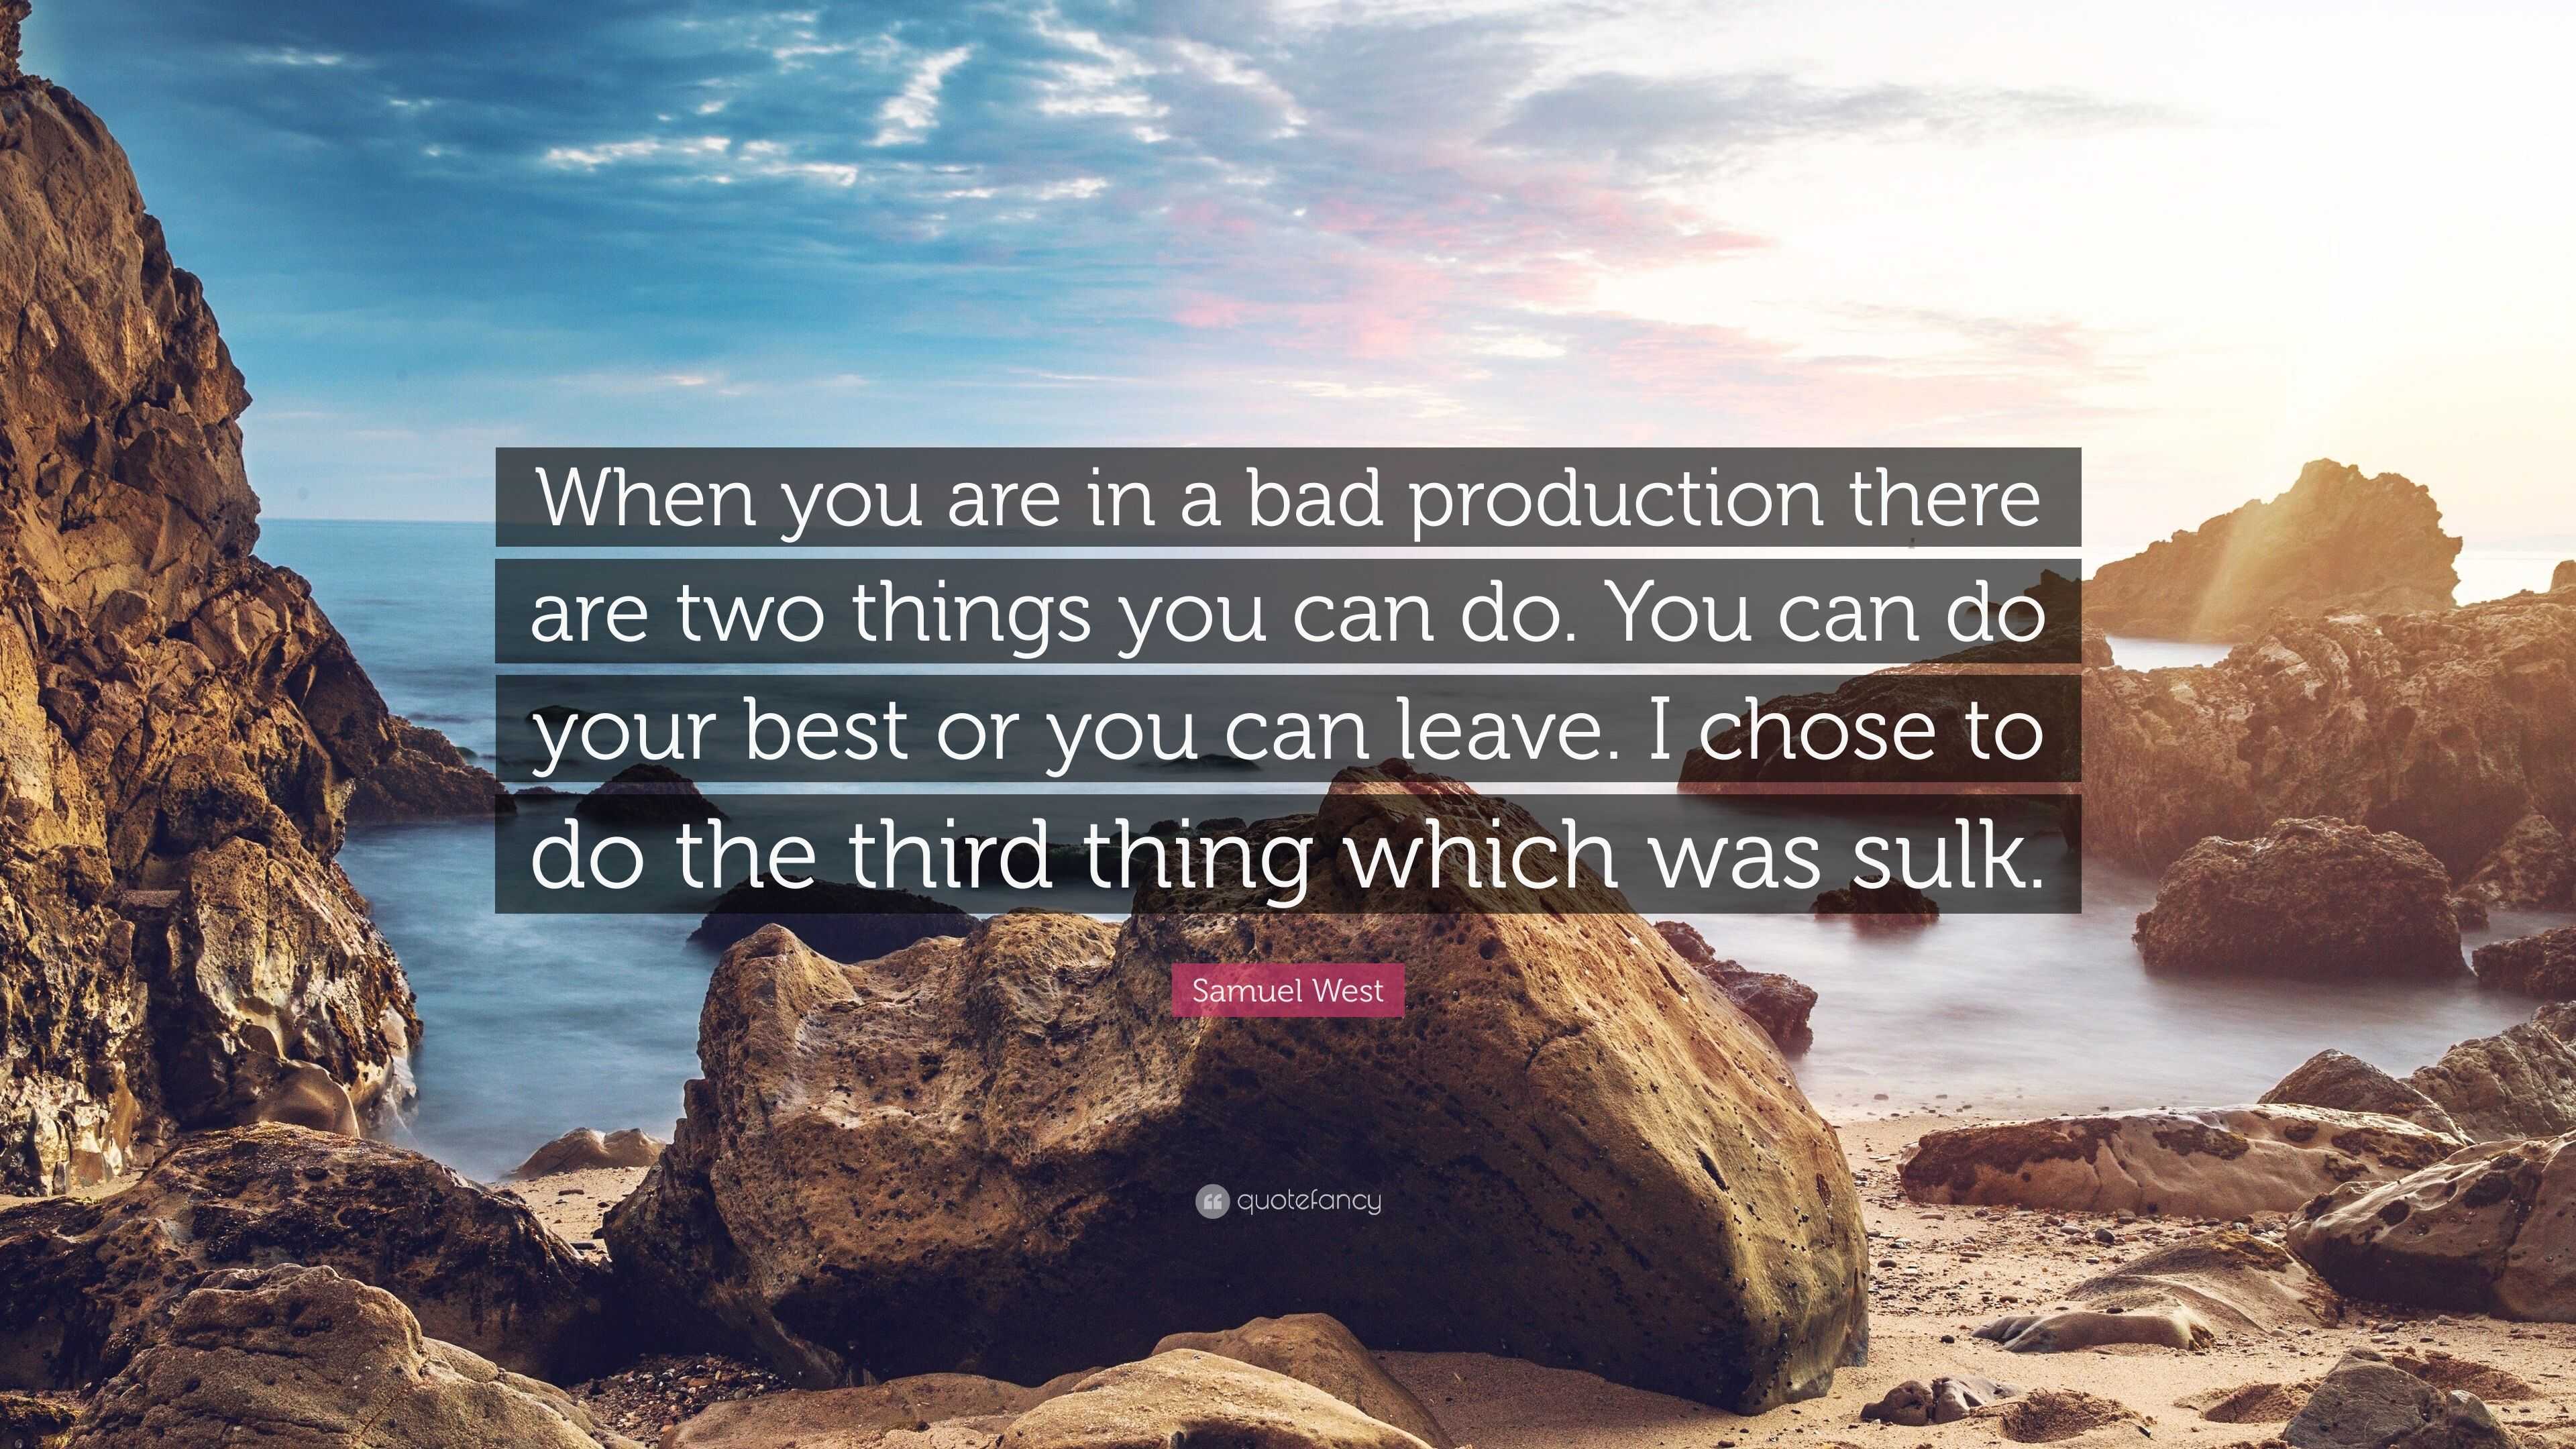 Samuel West Quote “when You Are In A Bad Production There Are Two Things You Can Do You Can Do 